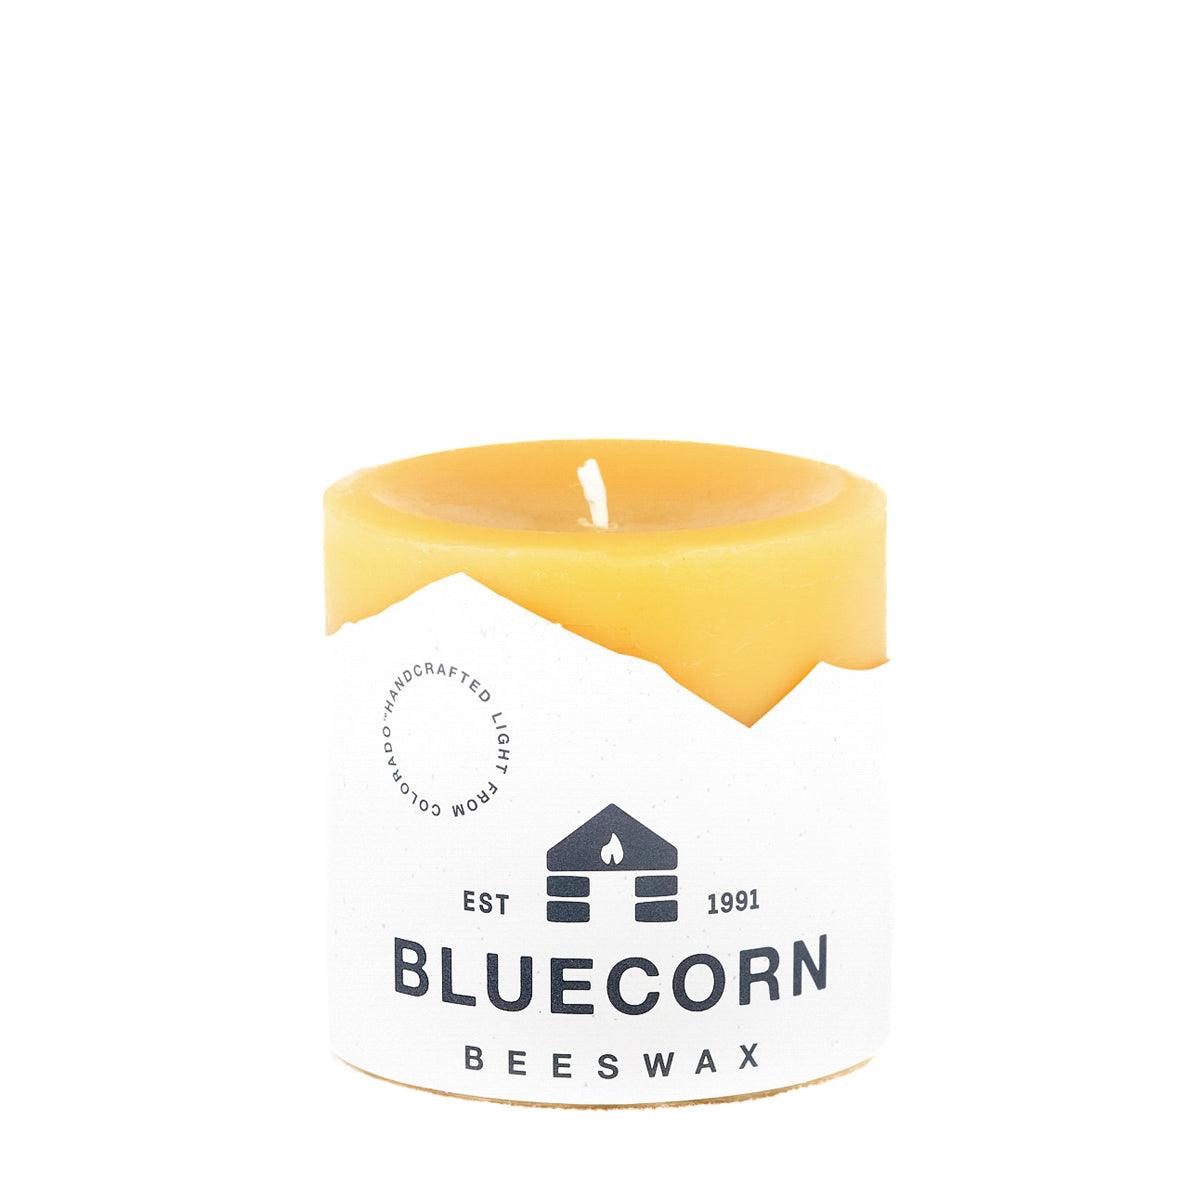 Bluecorn Beeswax 100% Pure Beeswax 3" x 3" Raw Pillar Candle. Burn Time: 50 hours. Made with 100% Pure Beeswax, is golden in color, with a light honey scent. Made with 100% pure cotton wick, no lead and paraffin free. Clean burning and non-toxic. Features Bluecorn Beeswax label printed on 100% recycled paper.